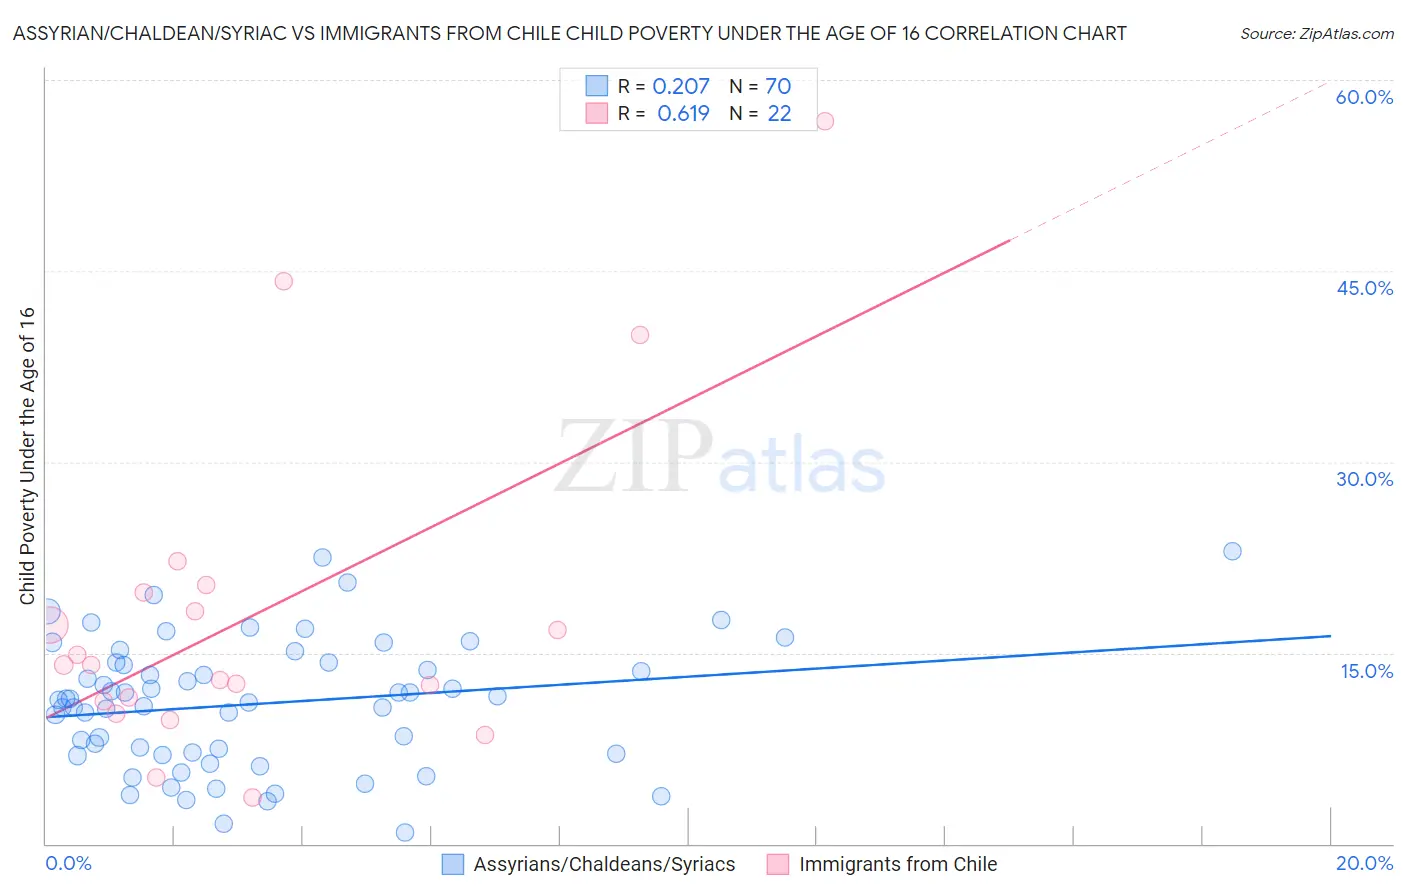 Assyrian/Chaldean/Syriac vs Immigrants from Chile Child Poverty Under the Age of 16